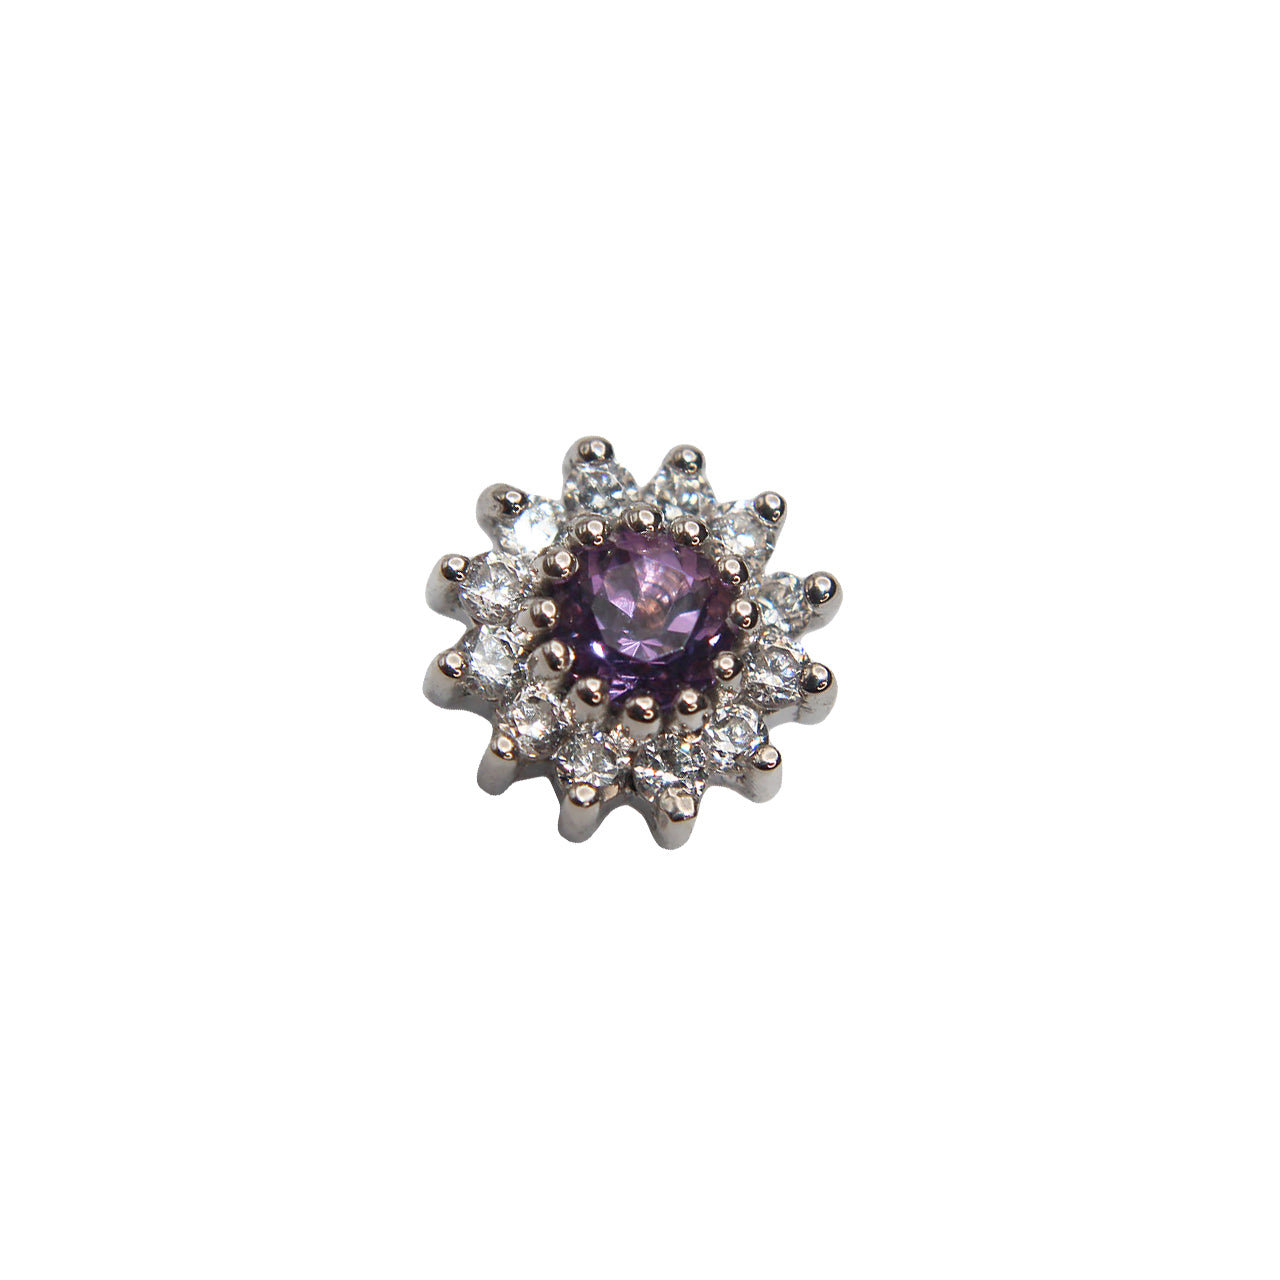 BVLA's "The Rose" in 14k White gold with Amethyst center stone and 12 smaller CZ circling the center